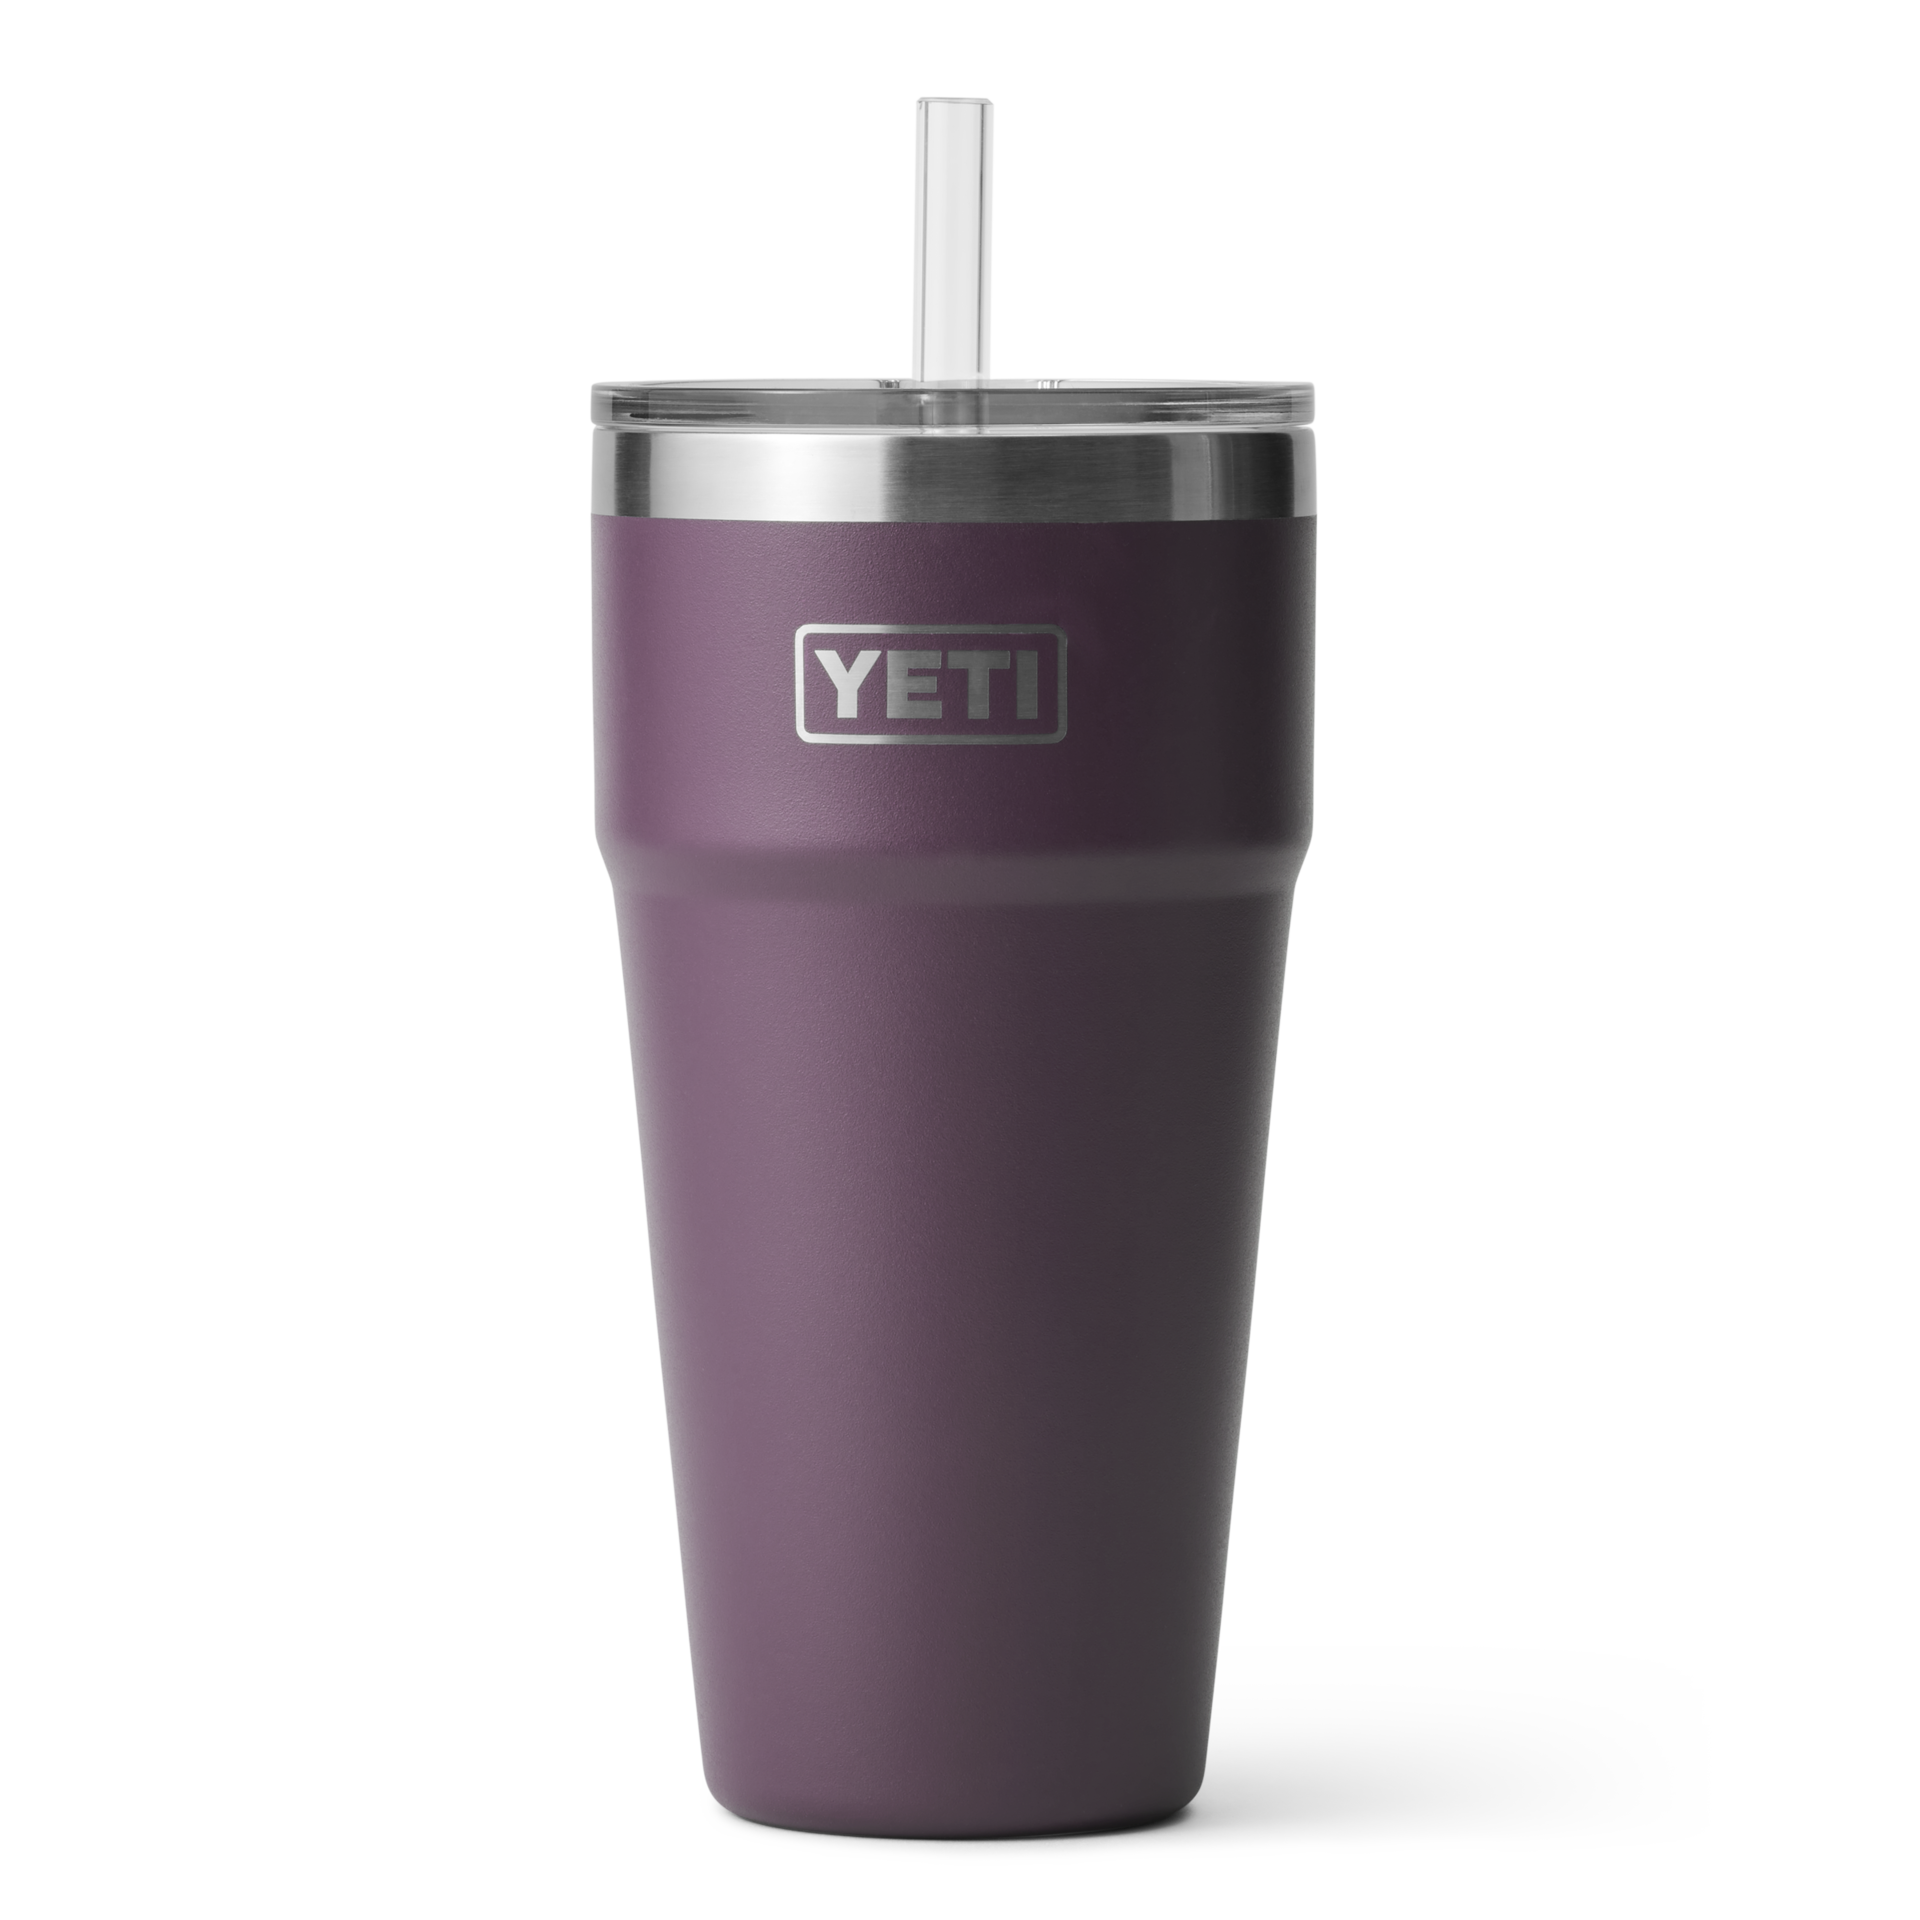 Yeti 21071500647 Rambler 26 oz. Stackable Cup with Straw Lid